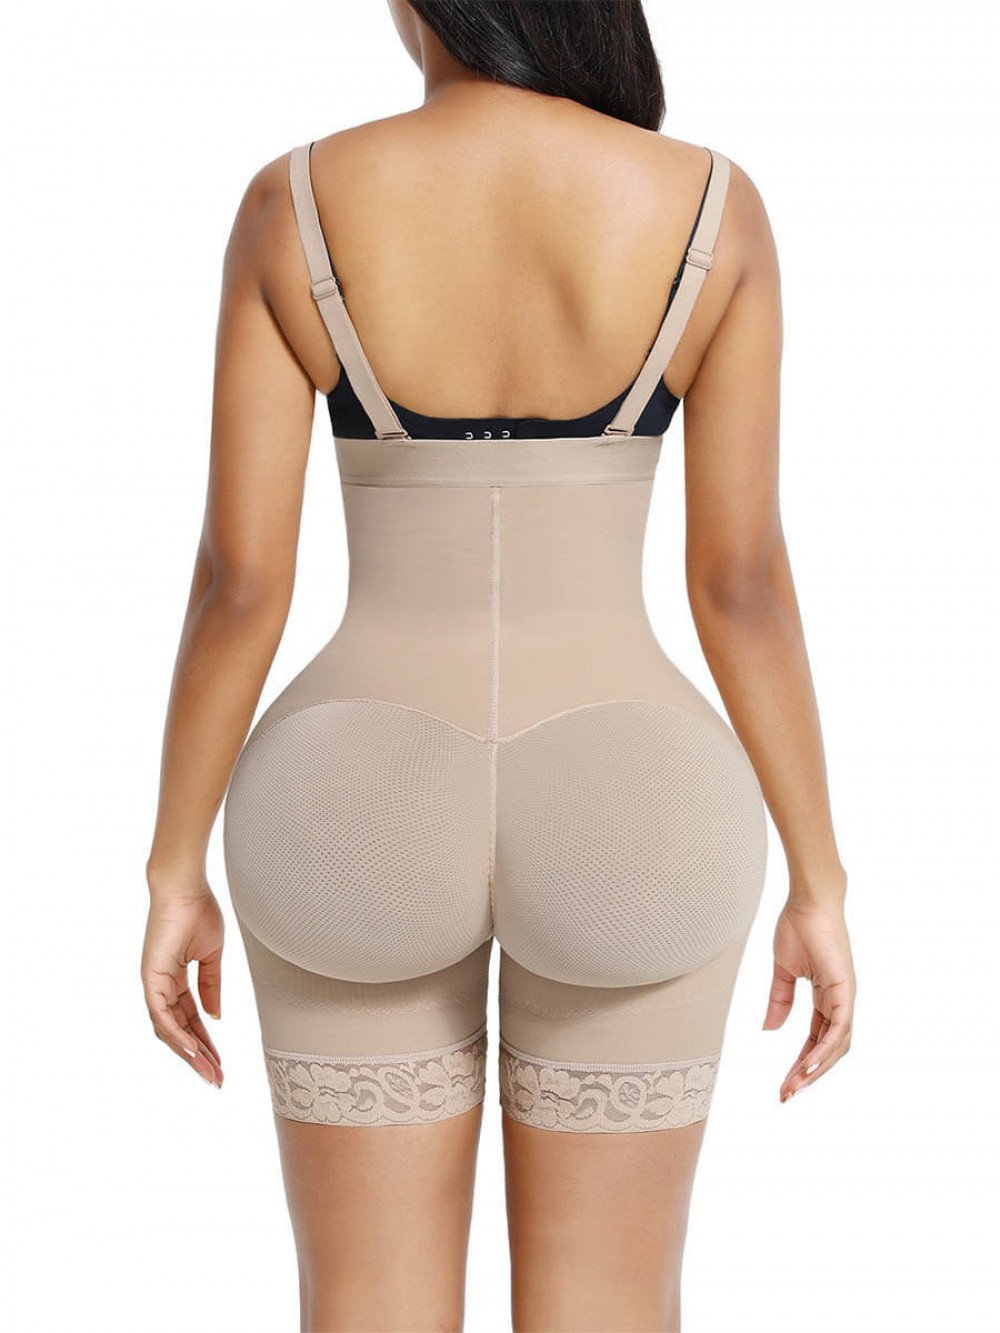 Nude Butt Lifter Slimming Tummy Smoothing Waist With 2 Steel Bones